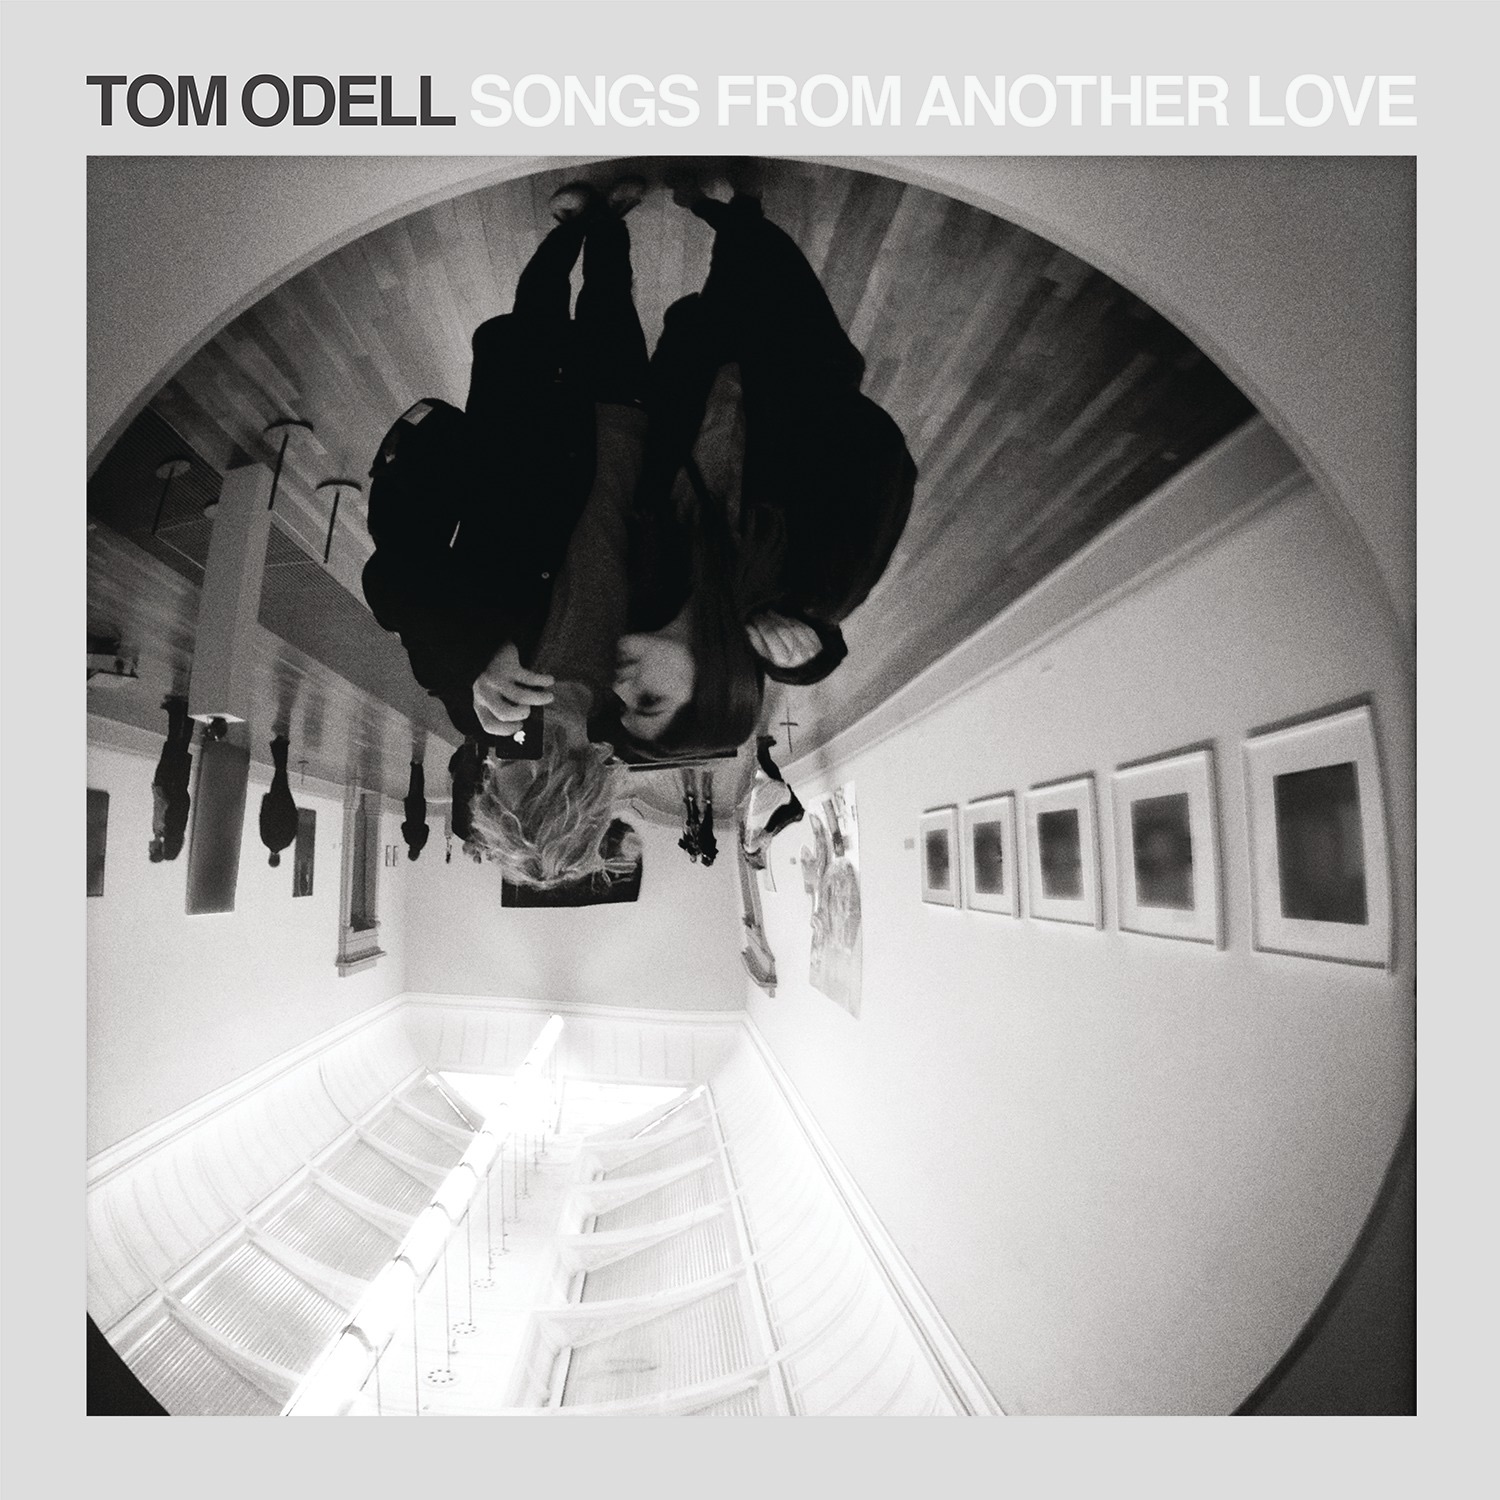 TOM ODELL - ANOTHER LOVE